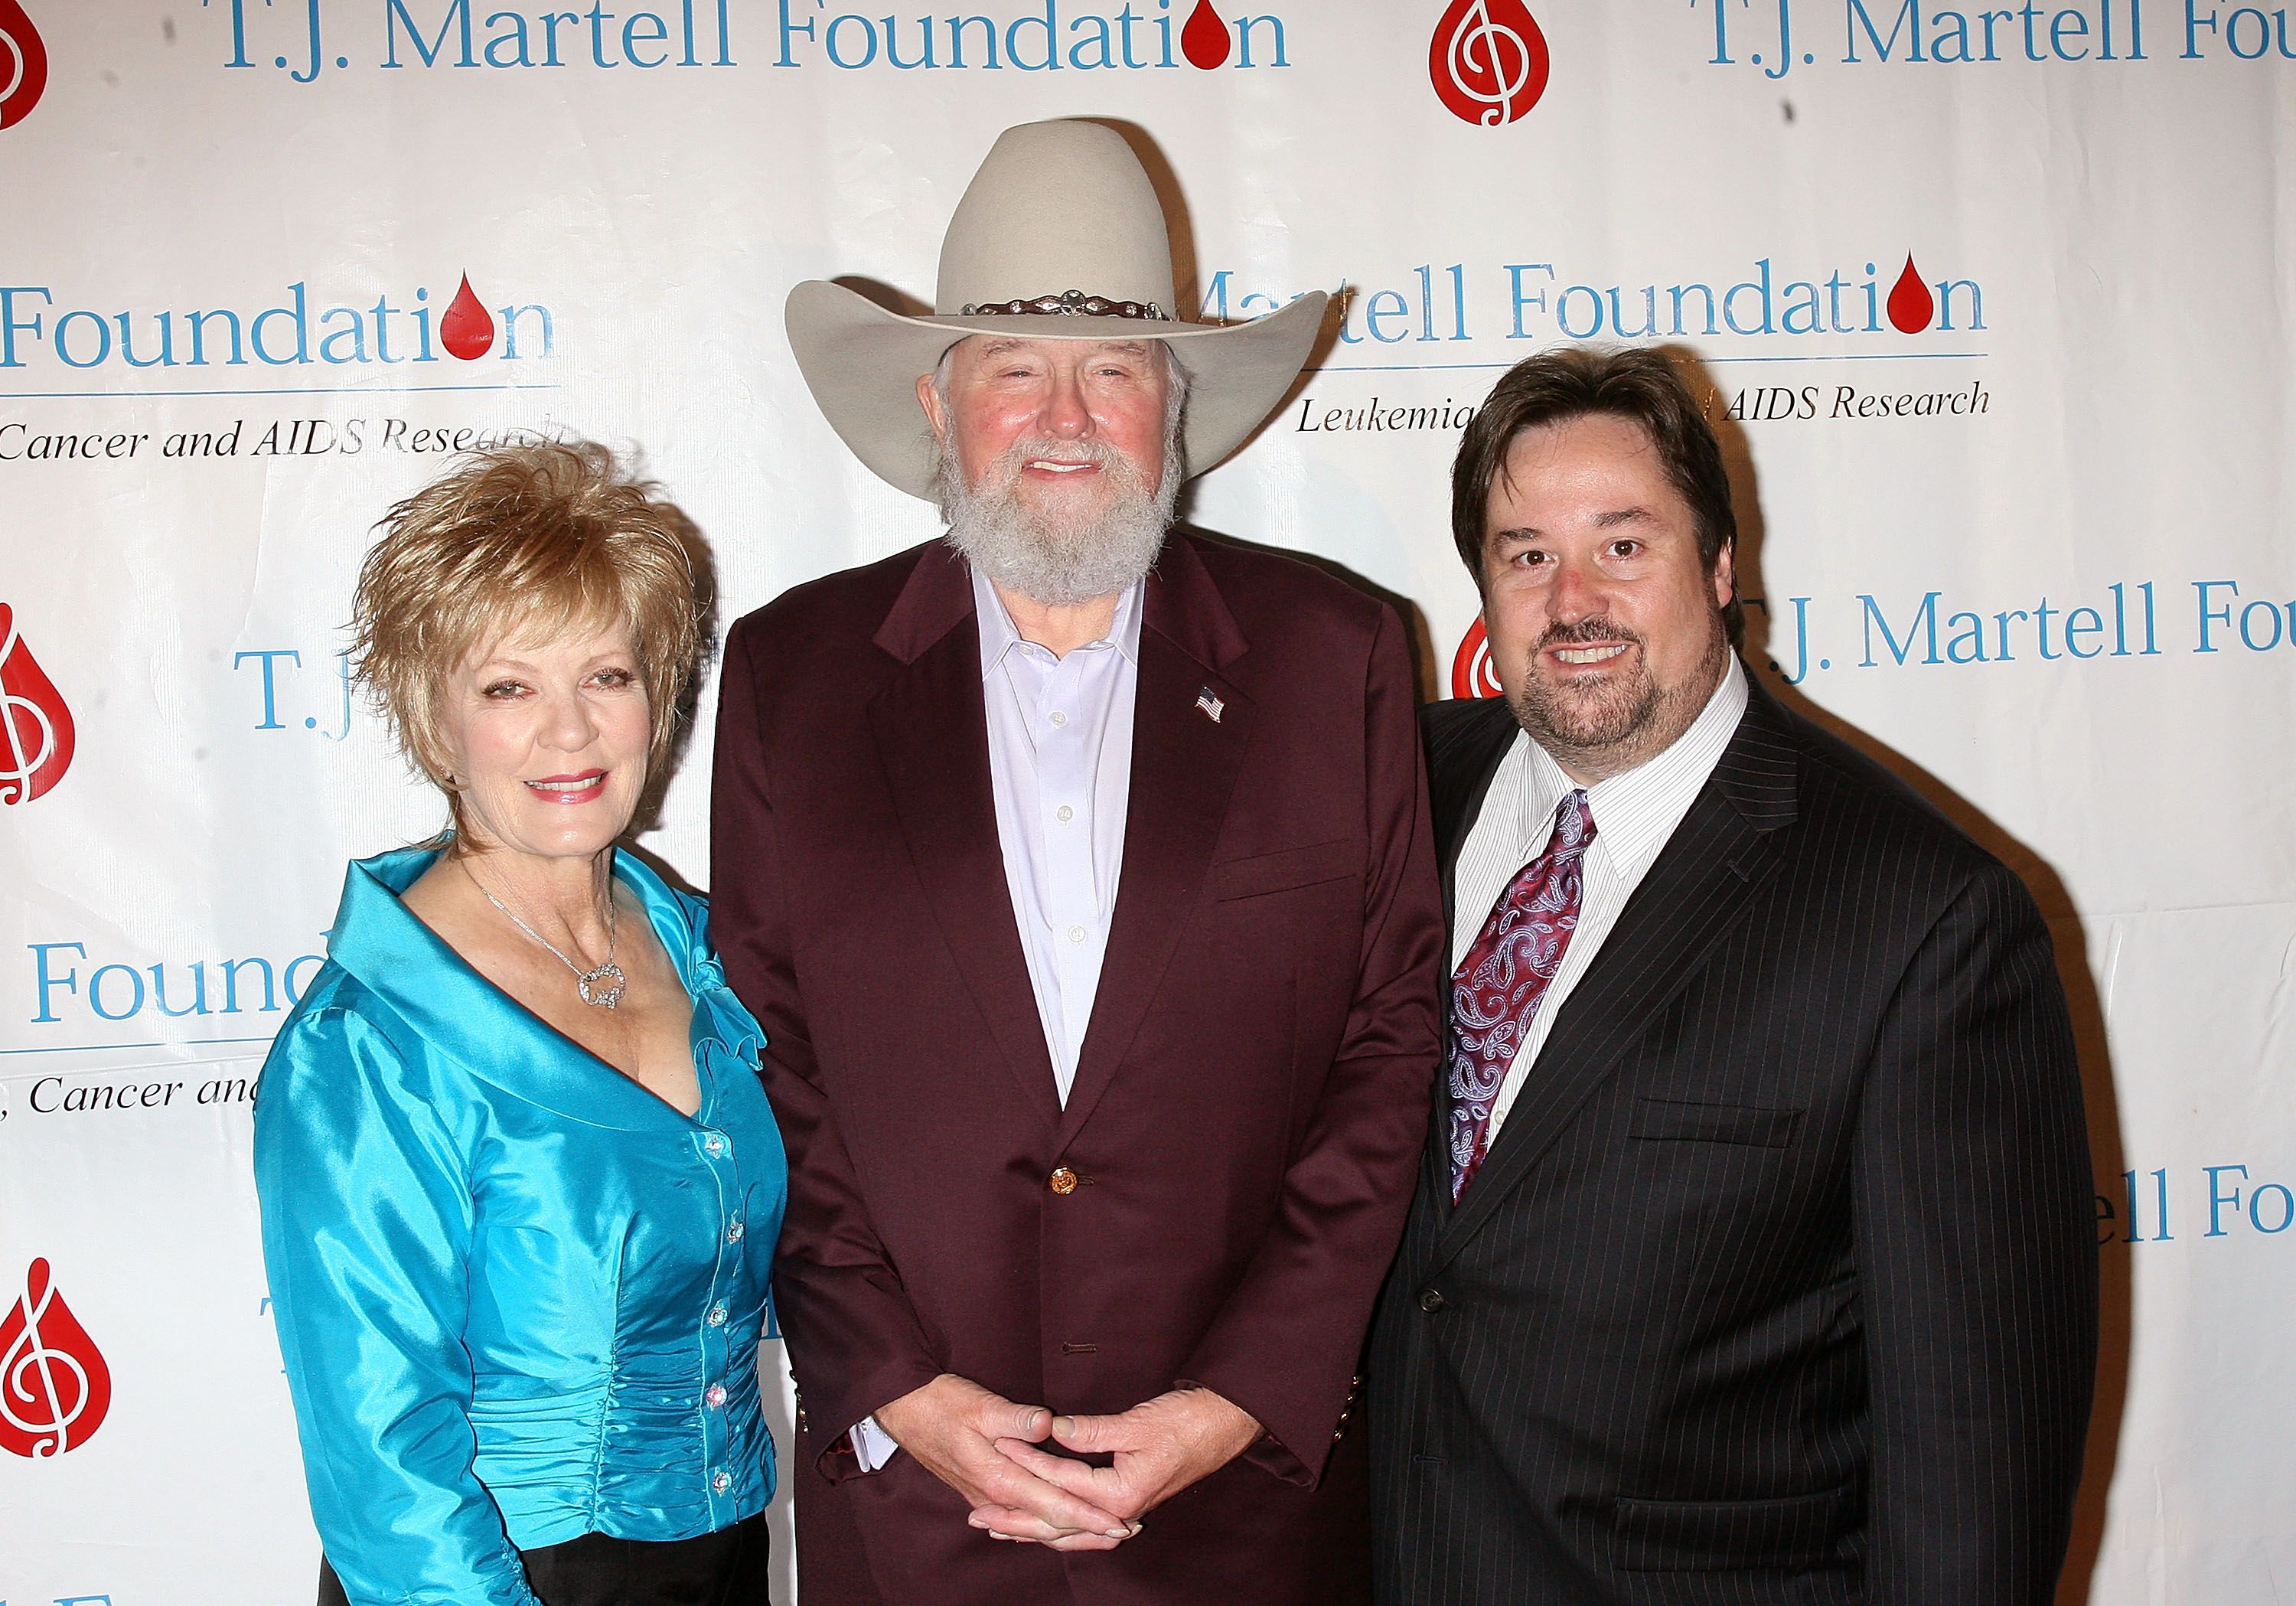 Charlie Daniels with son Charlie Daniels Jr. and wife Hazel at the T.J. Martell Foundation 35th Annual Awards Gala at Marriot Marquis on October 27, 2010 in New York City | Photo: Getty Images 